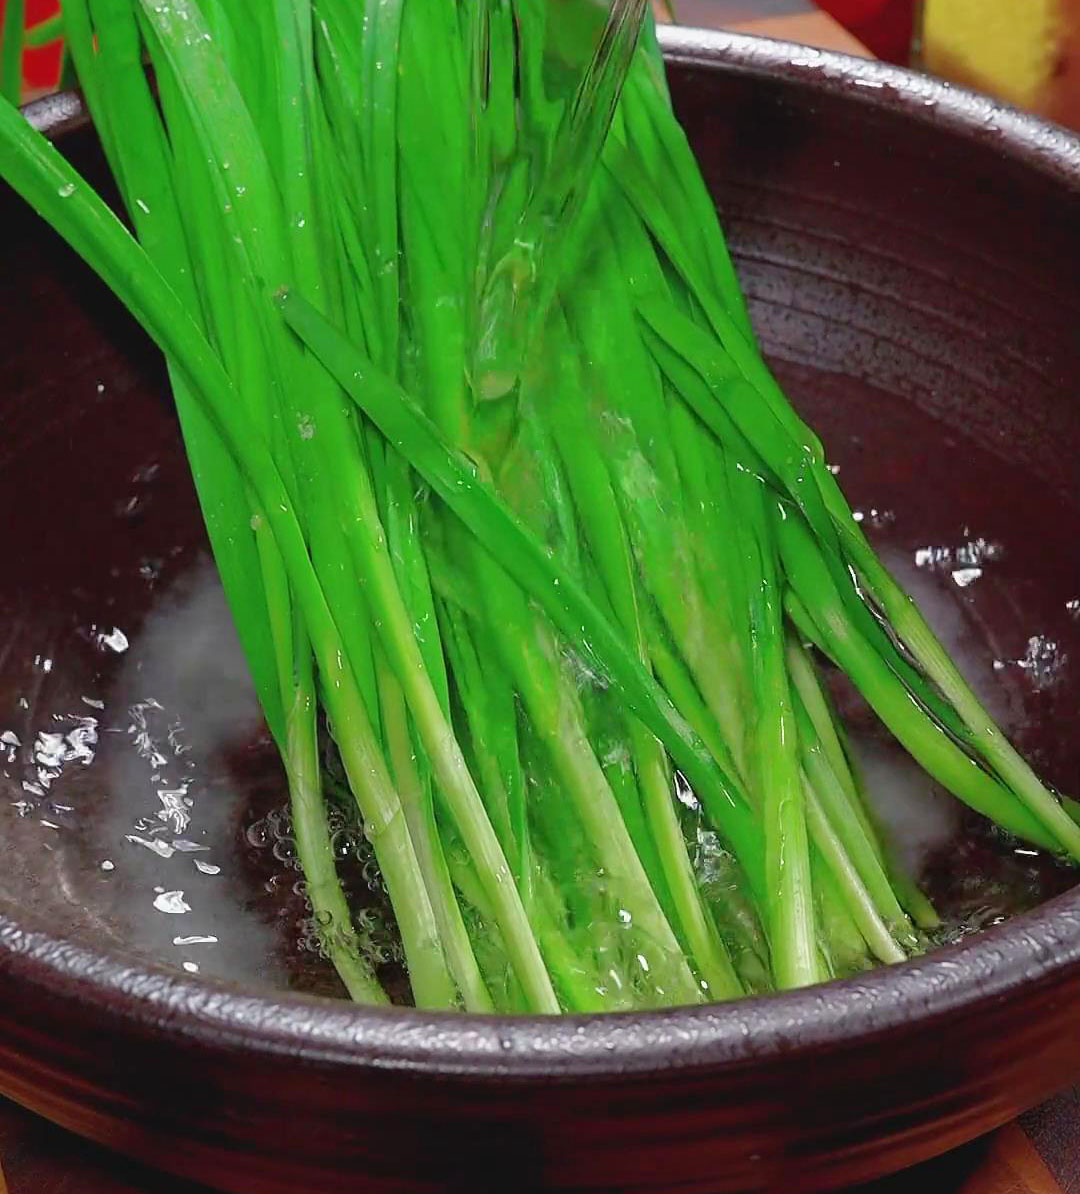 Soak the chives in clean water